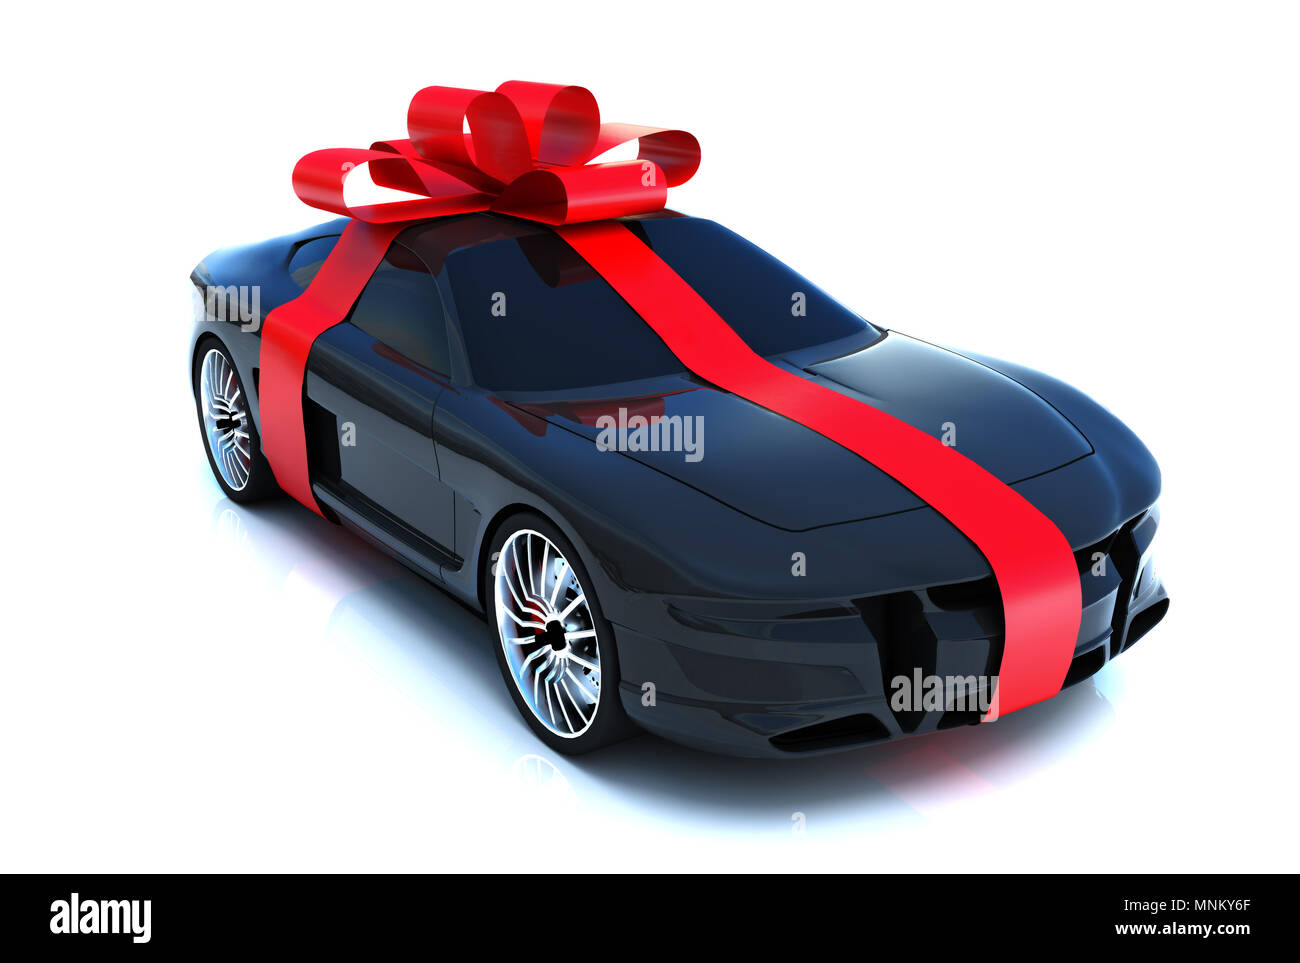 Big Car Bow Valentines Bow Giant Ribbon Ribbon for Your Car Gift